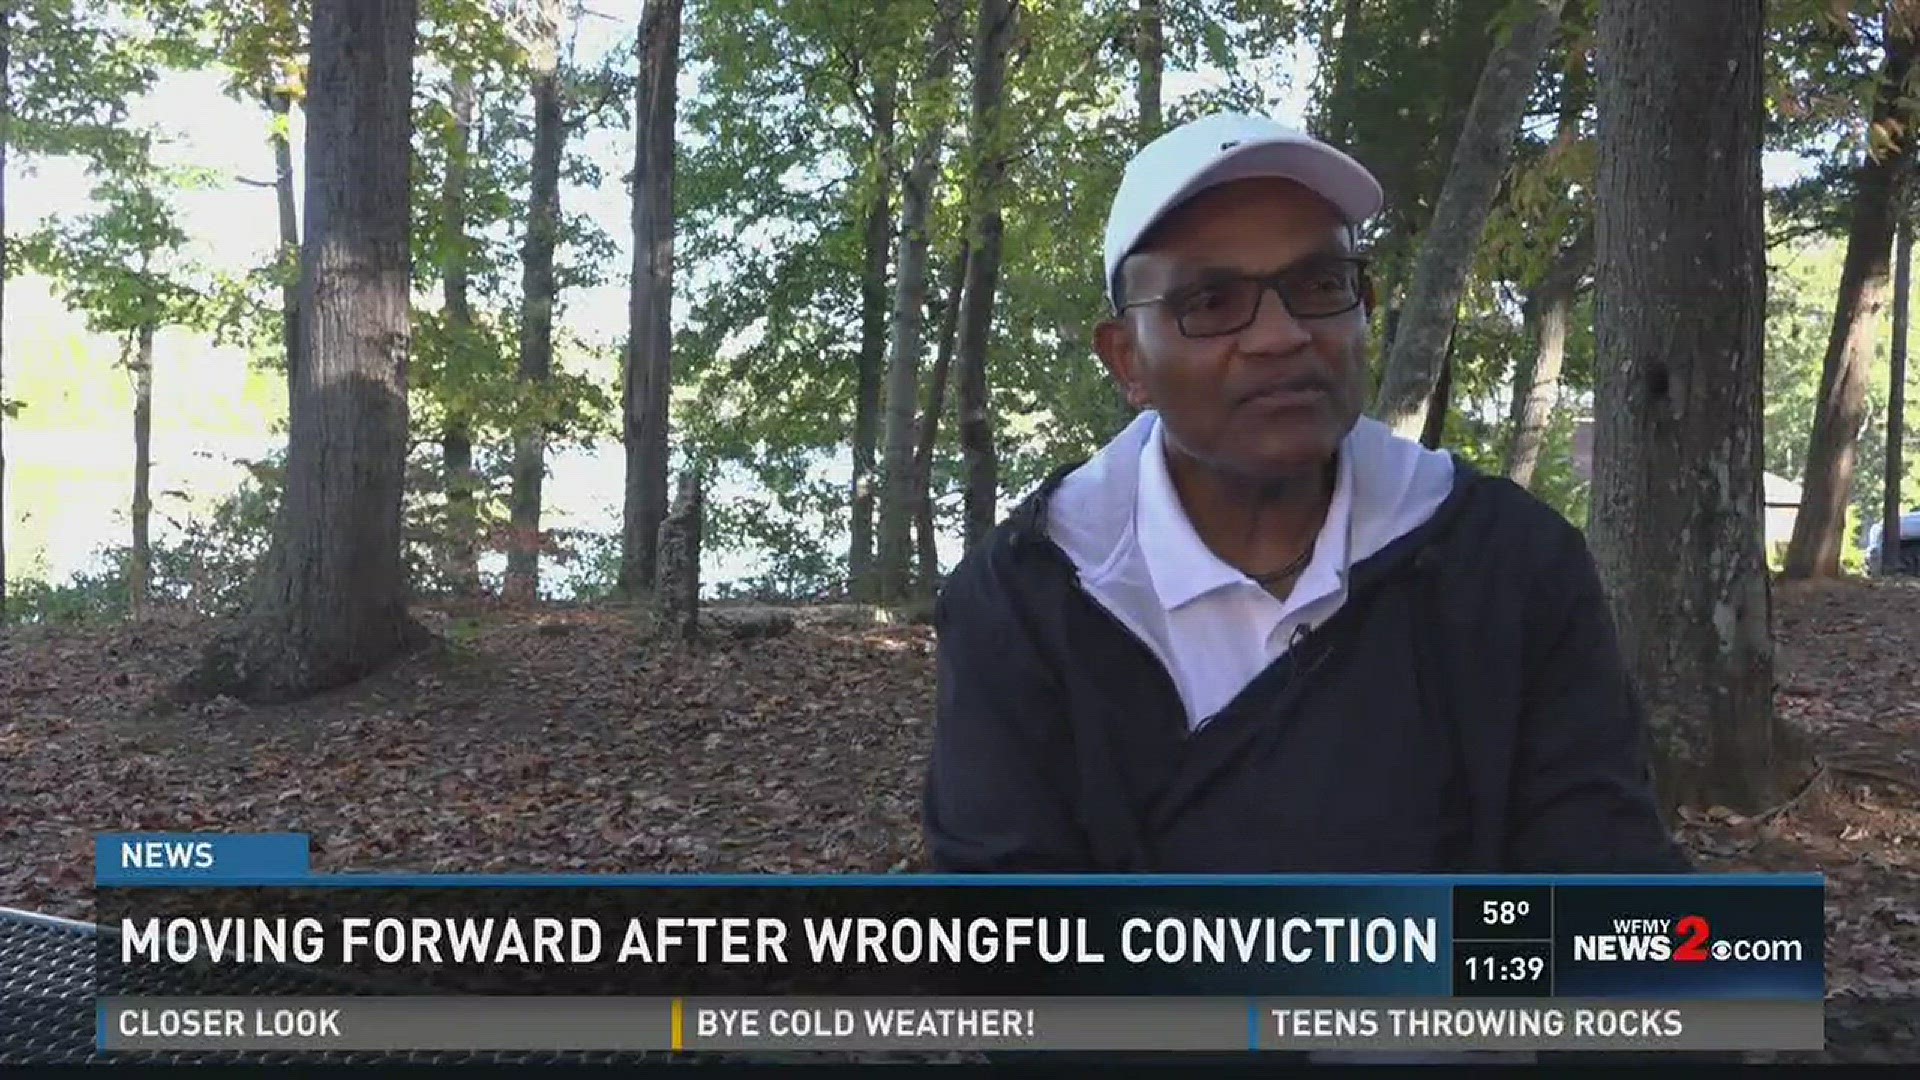 Man Wrongfully Convicted Of Murder Keeps Moving Forward